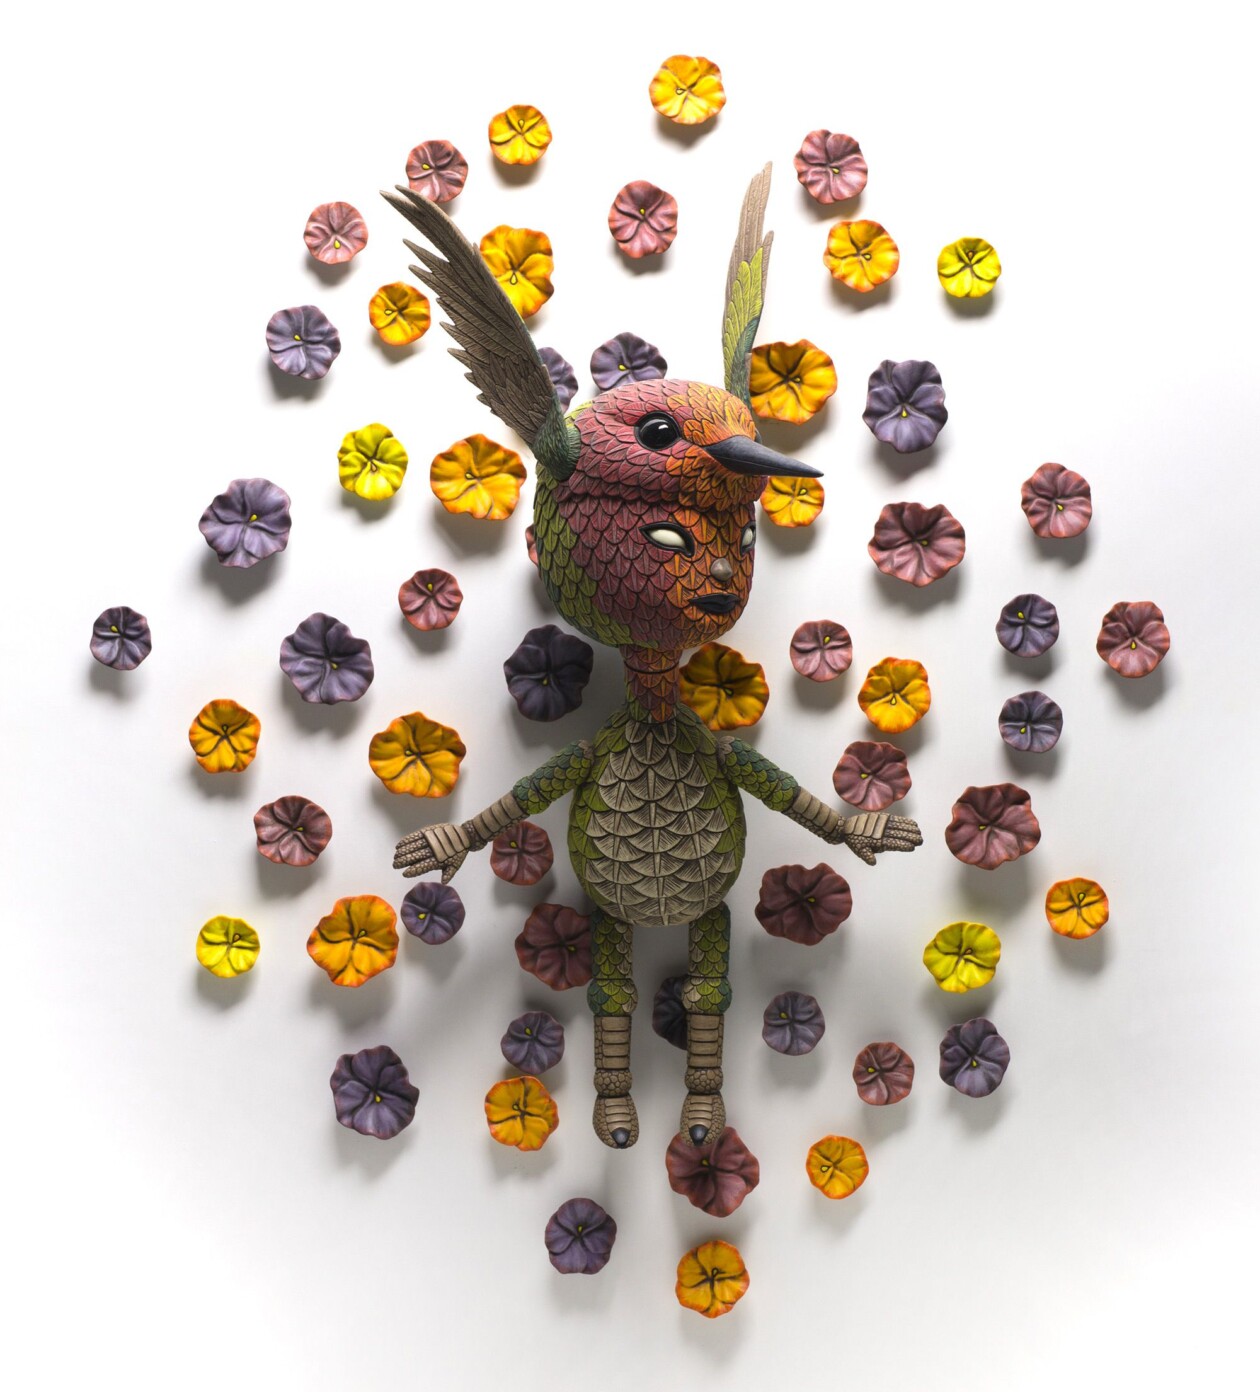 Marvelous Anthropomorphized Bird Sculptures By Calvin Ma (3)